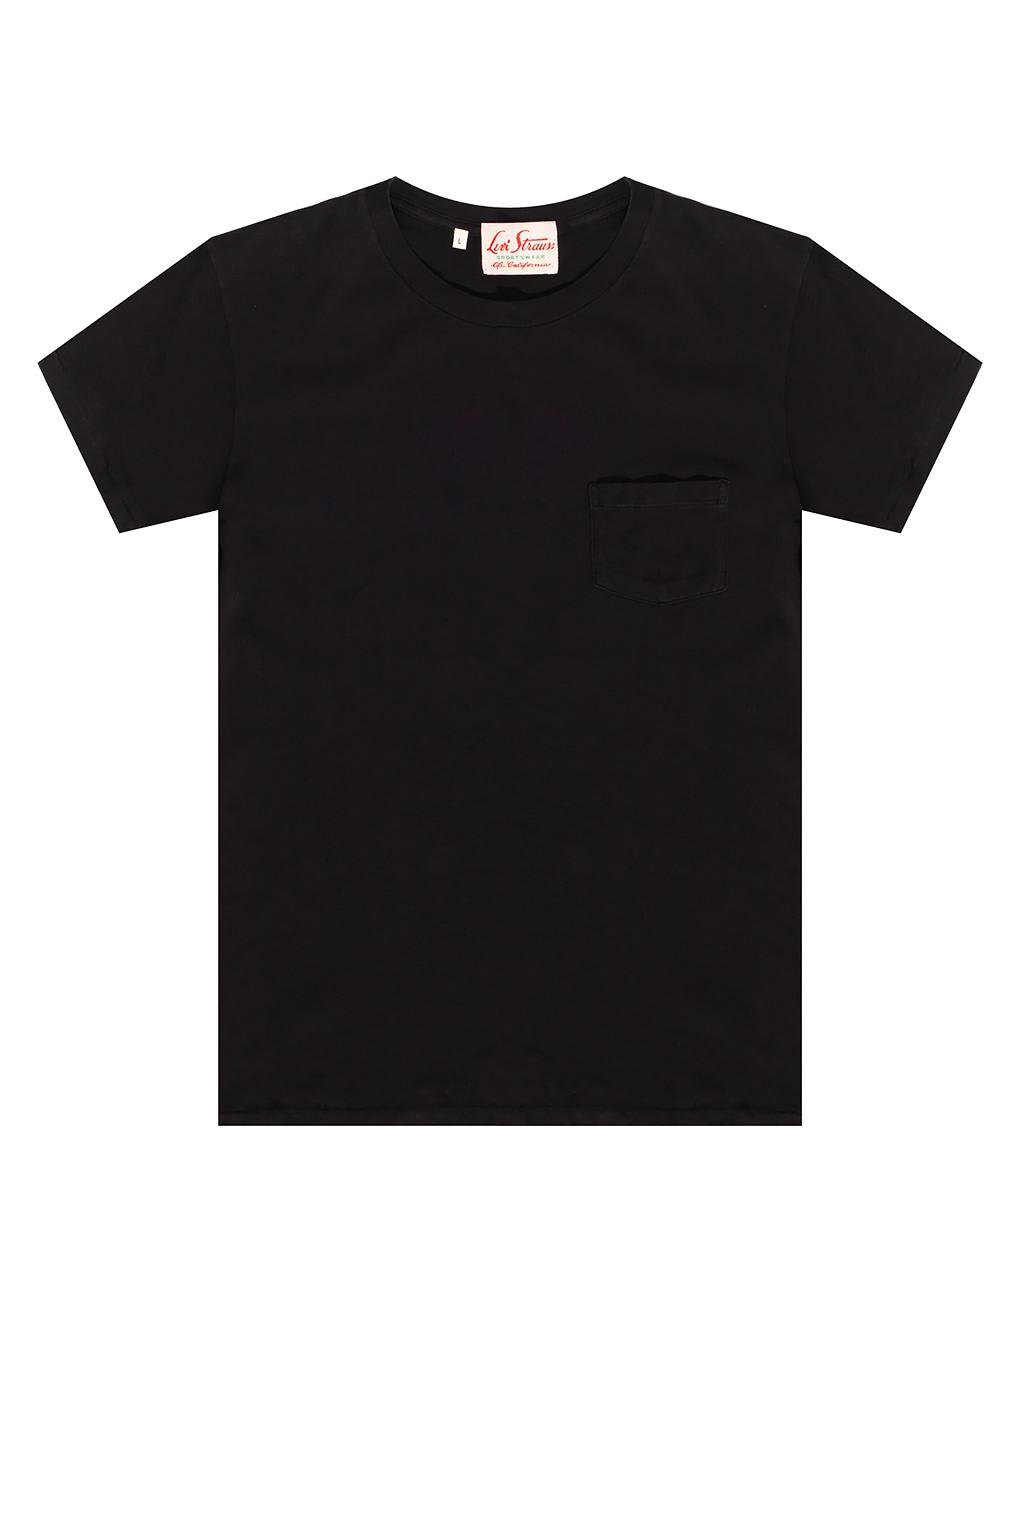 Levi's Levis T-shirt Vintage Clothing Collection In Black